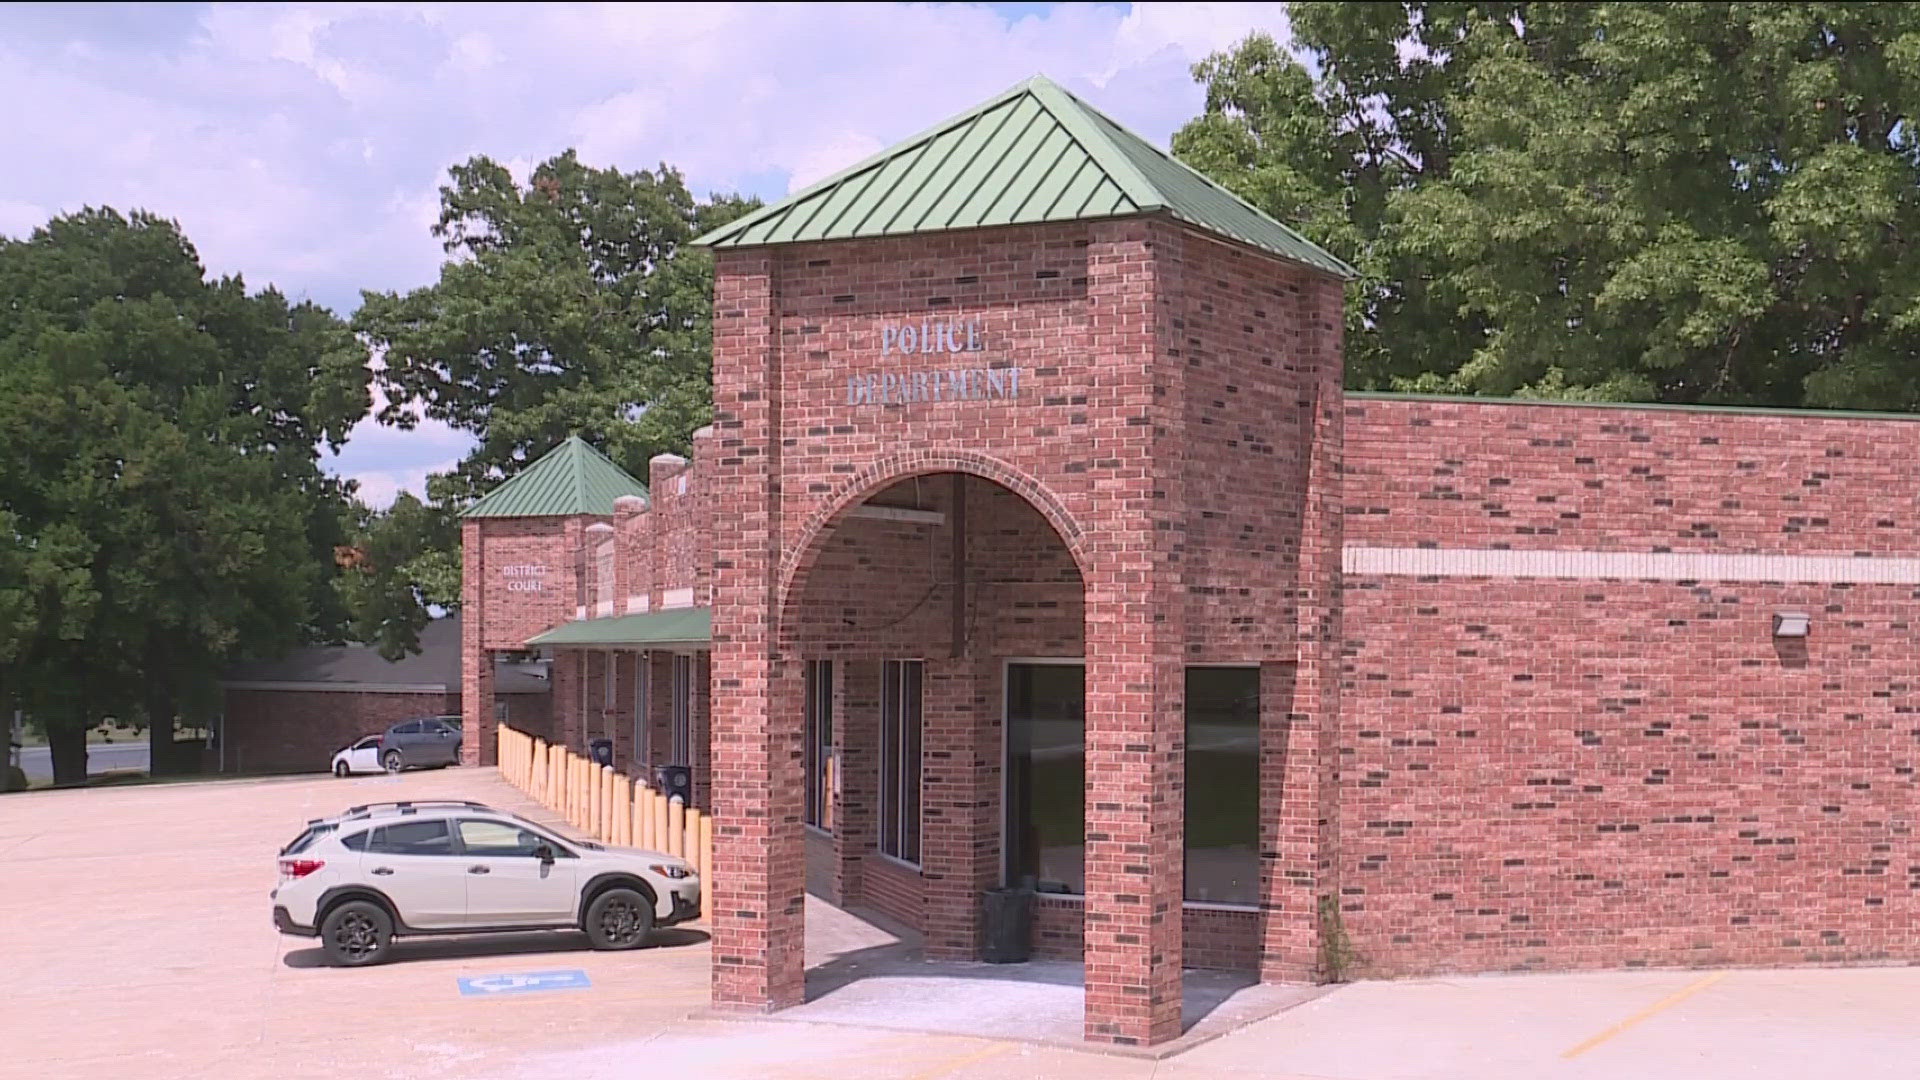 The City of Prairie Grove is investing in expanding its police department facility.